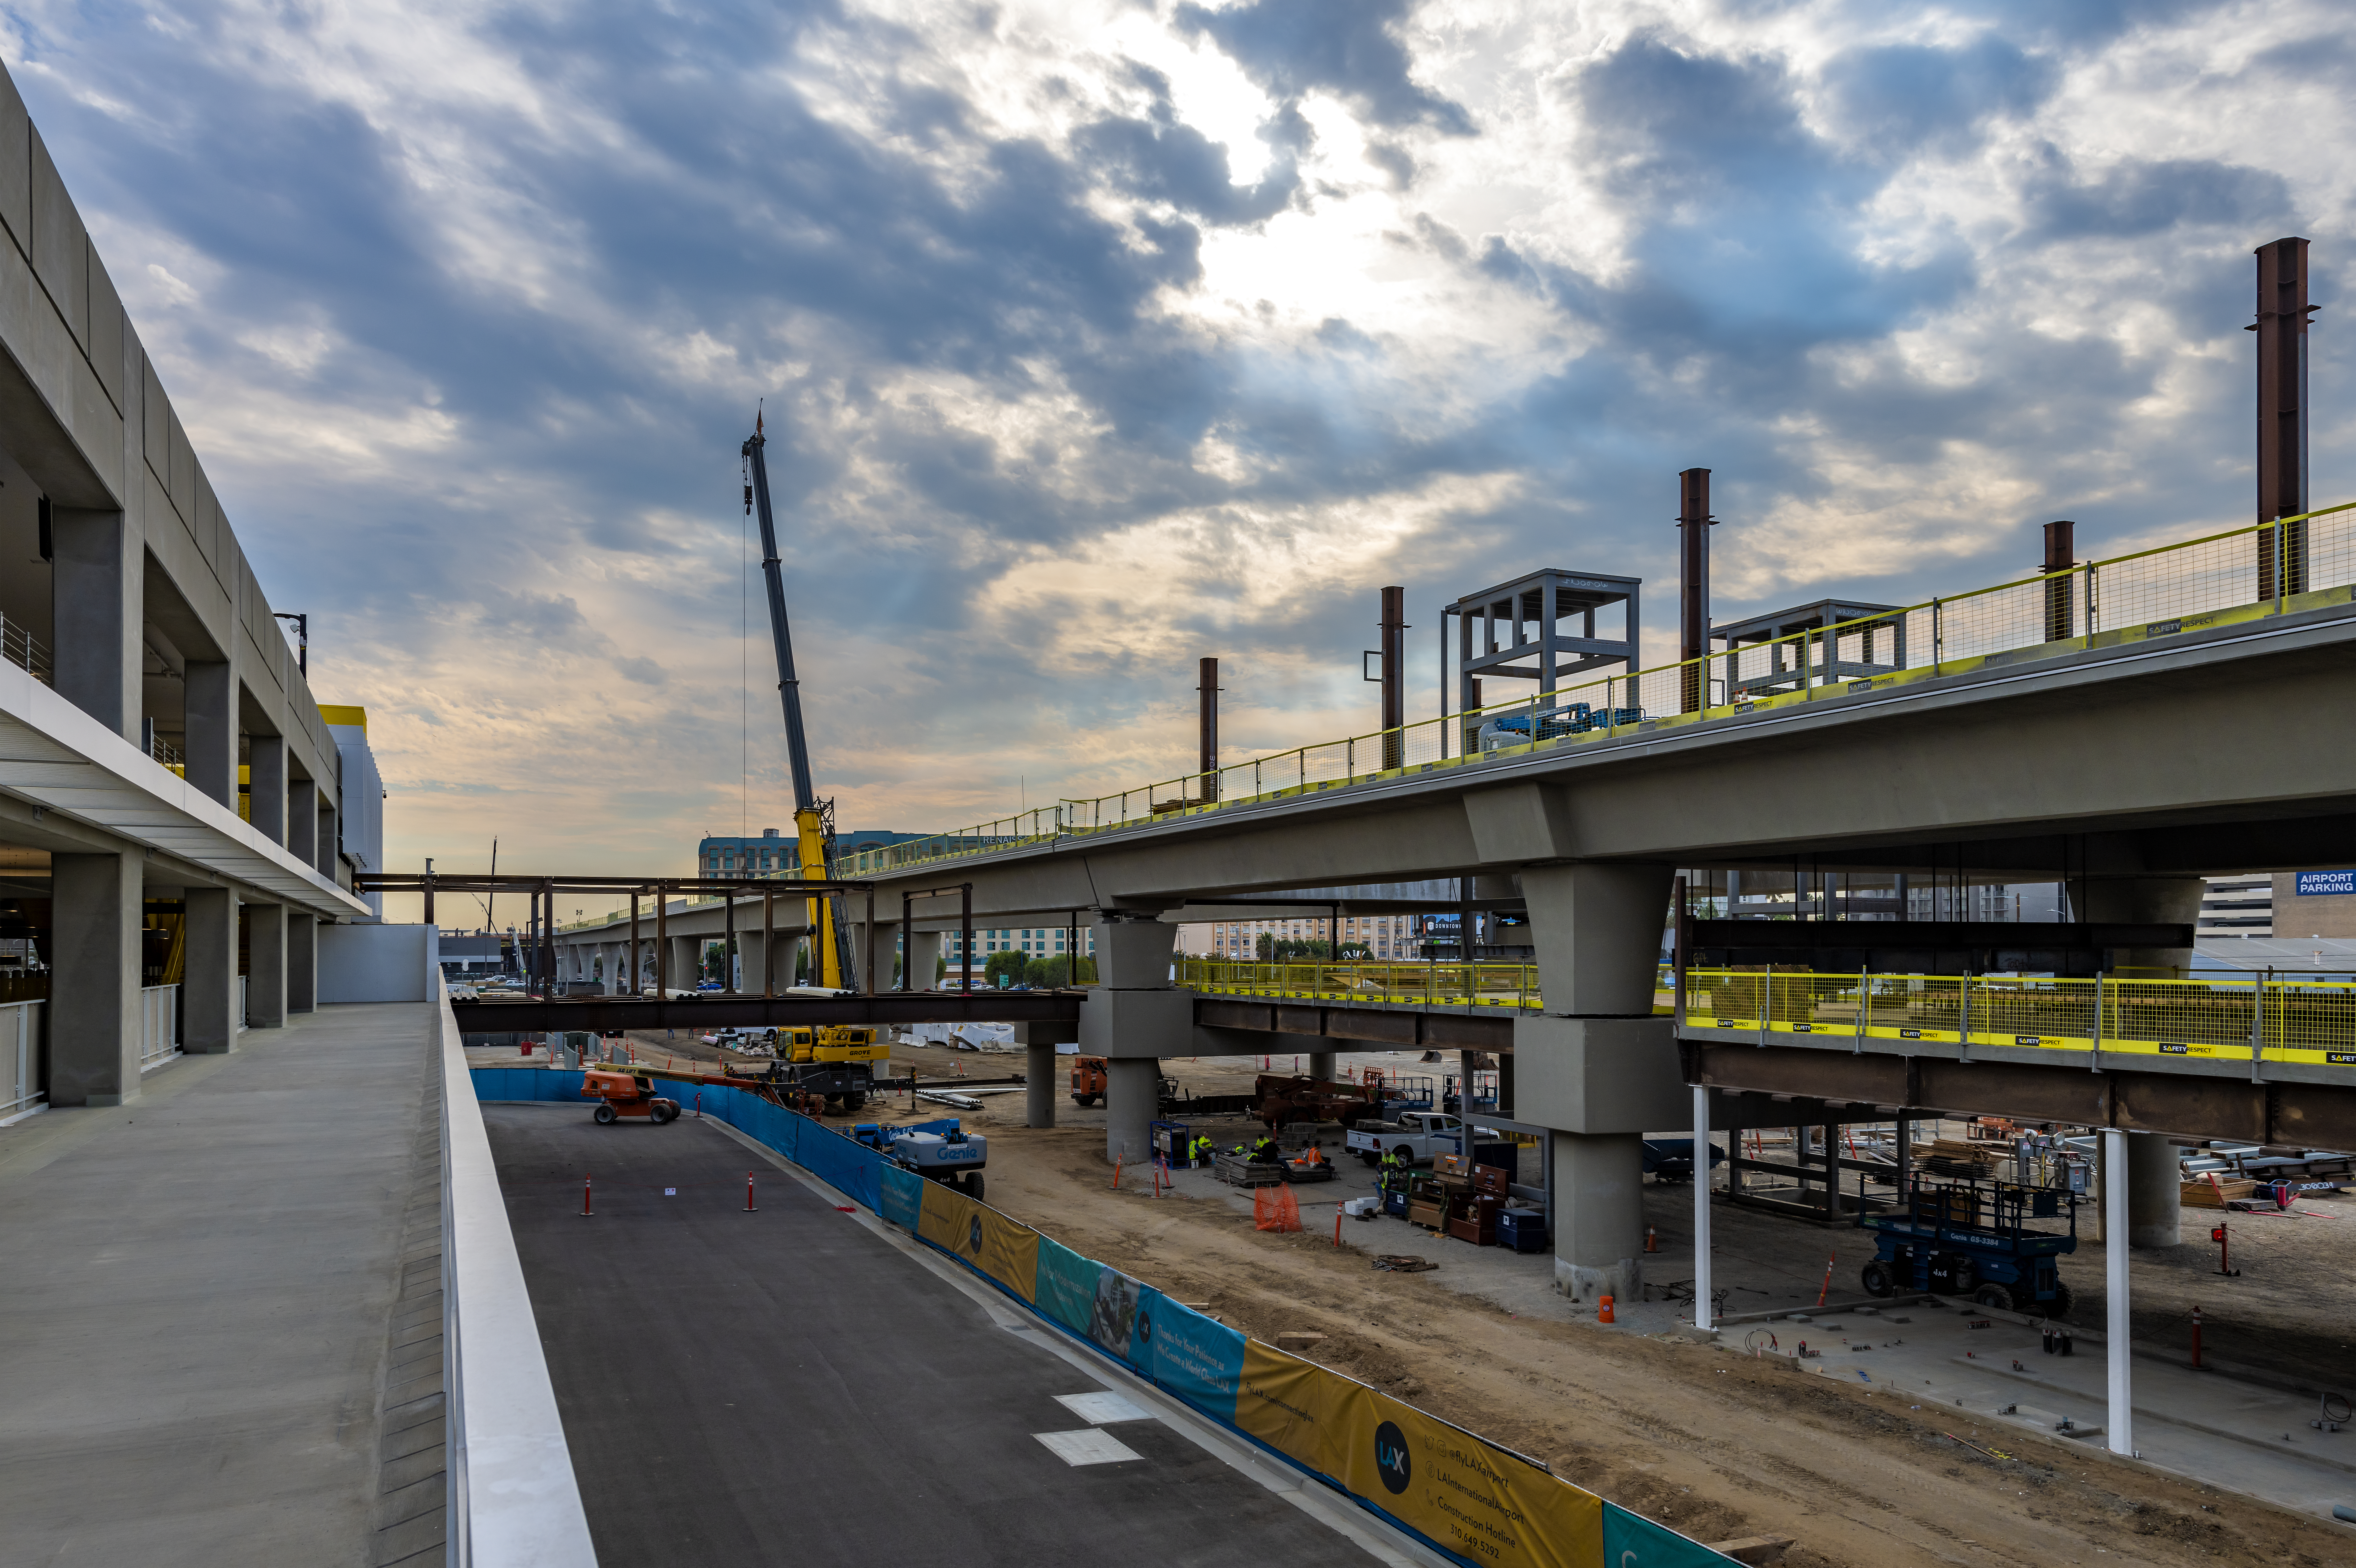 Pedestrian bridge structures that will eventually connect LAX Economy Parking to the People Mover station were installed in October.